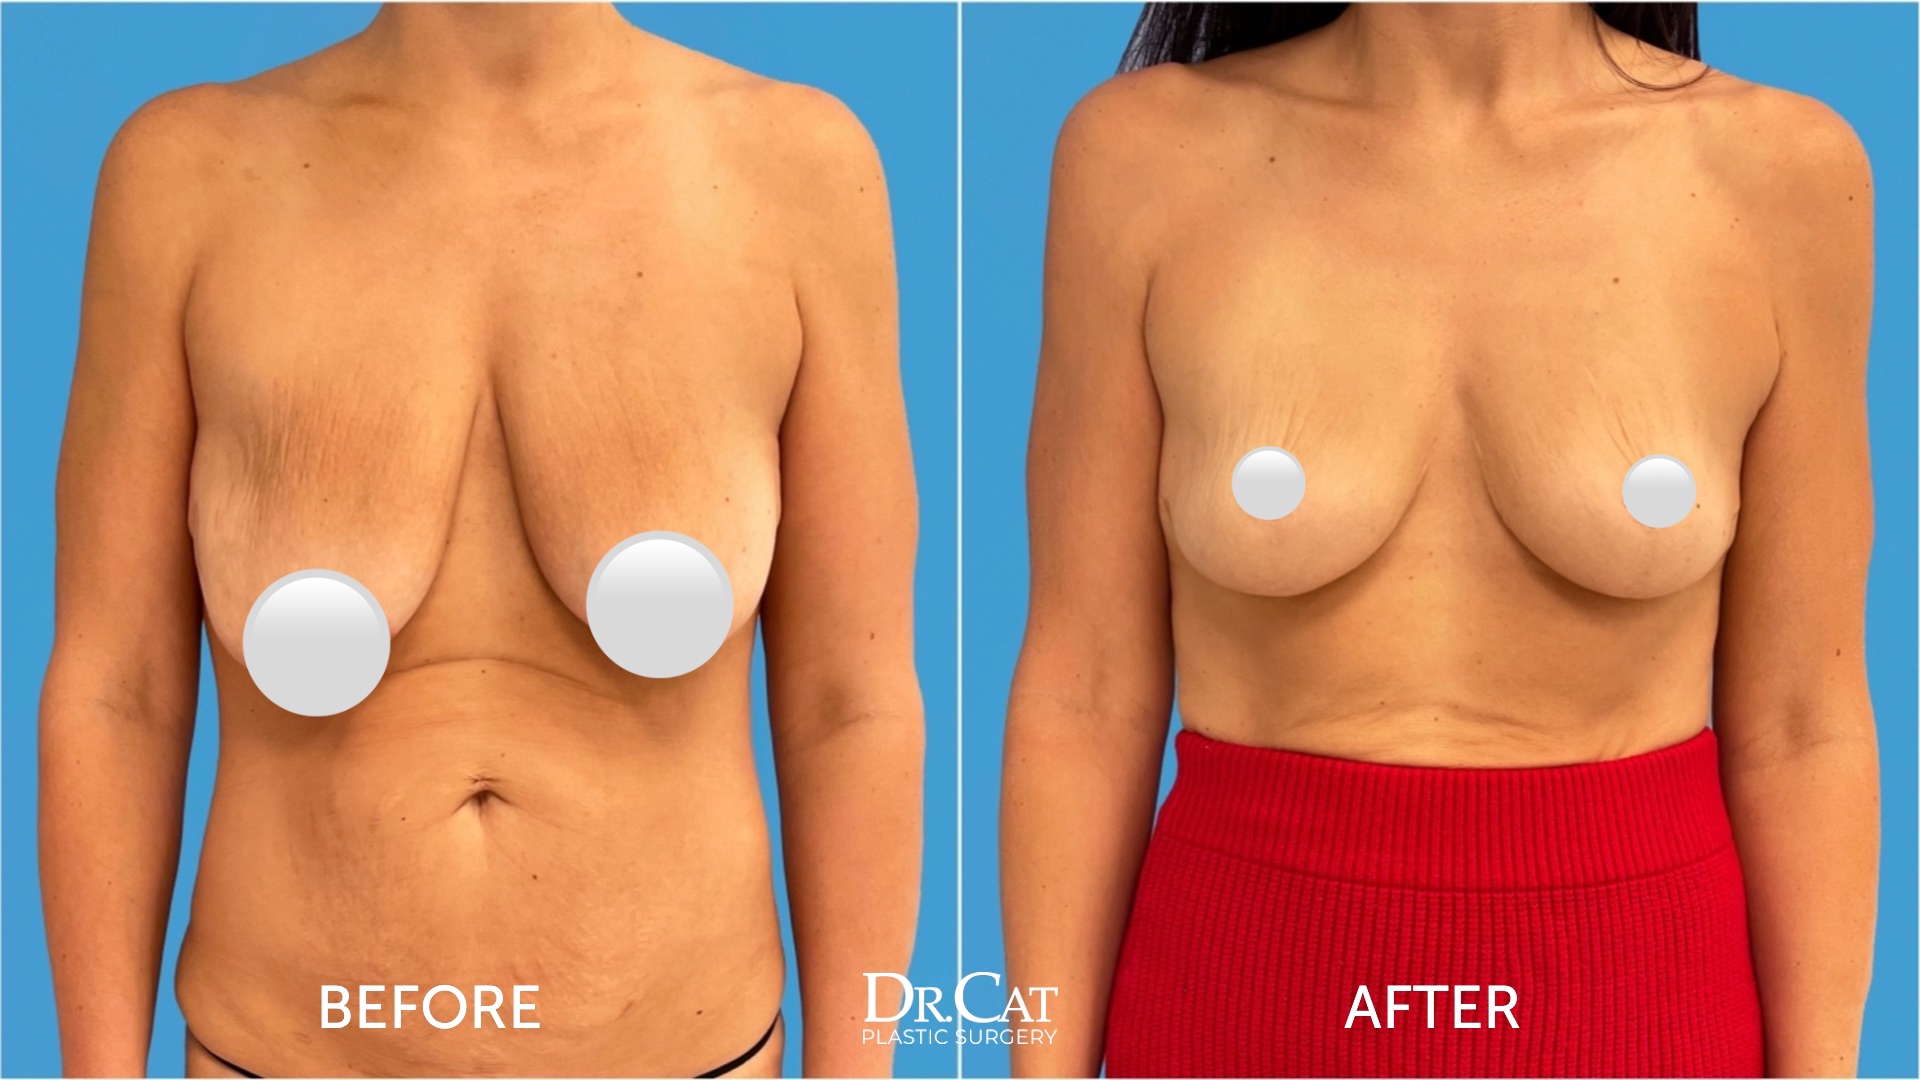 Top 7 Tips to Ease Your Breast Augmentation Recovery